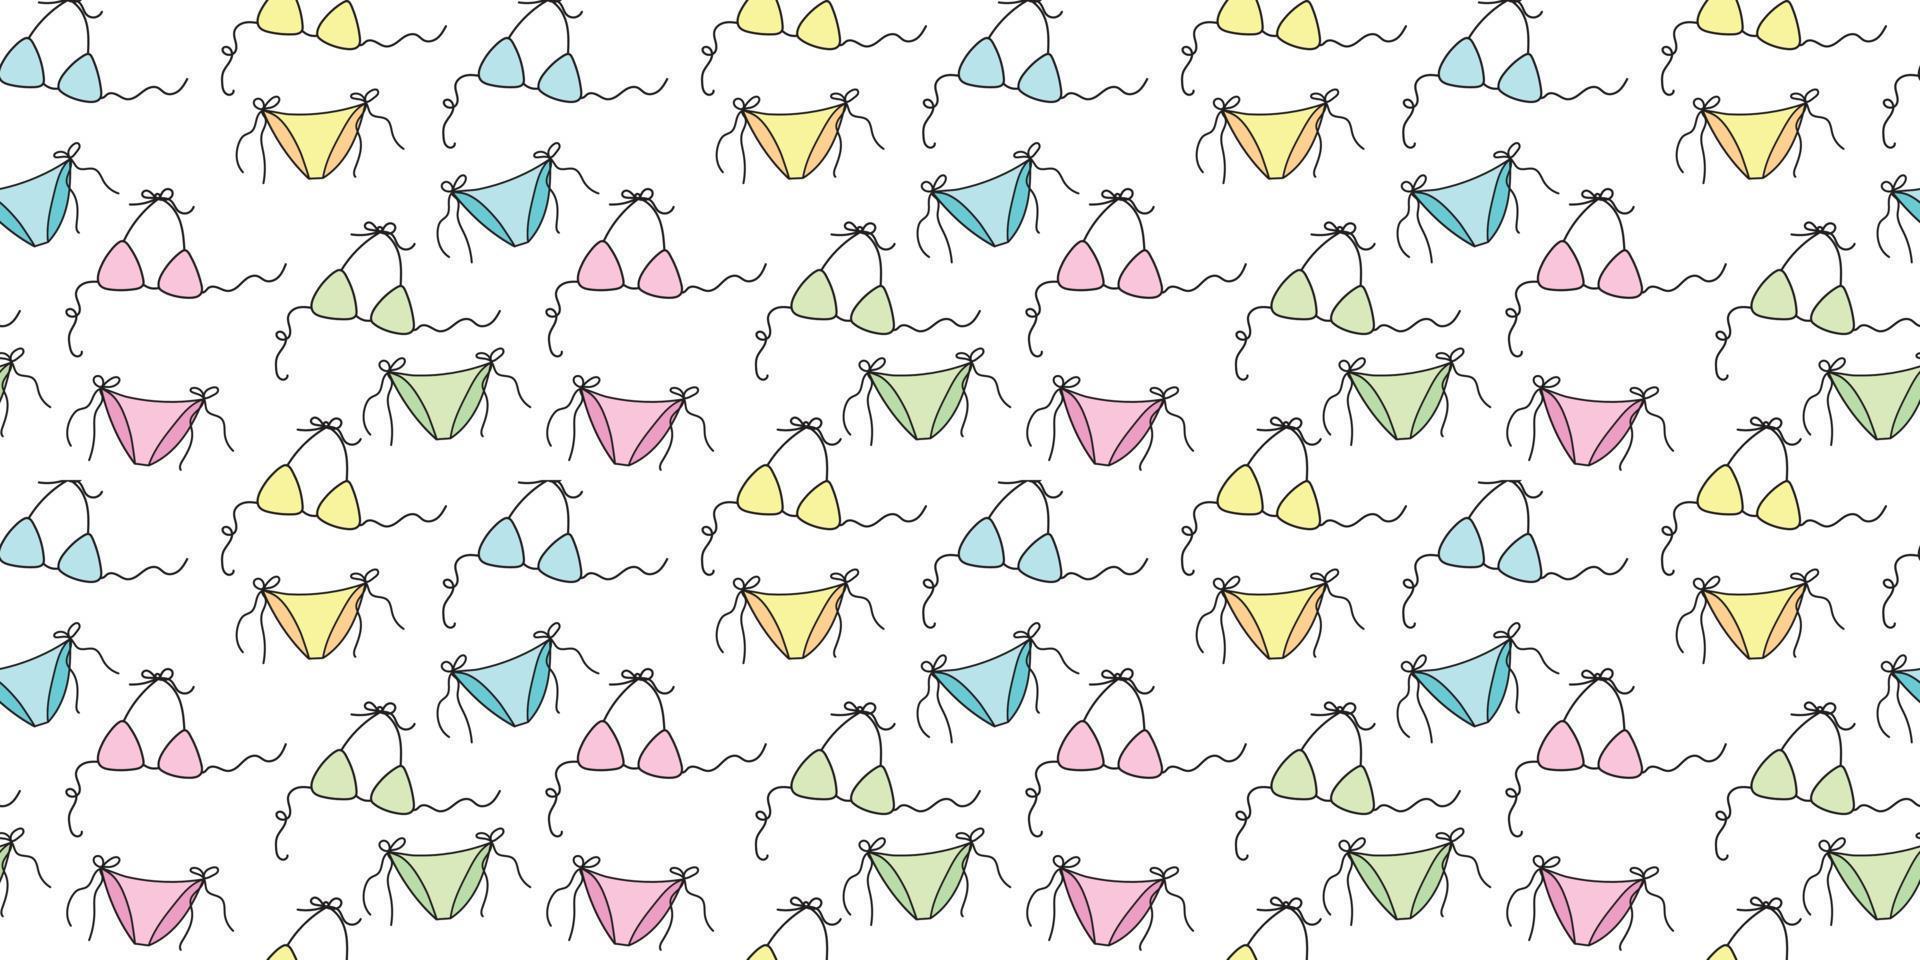 Swimsuit colorful repeat pattern background for the summer vector